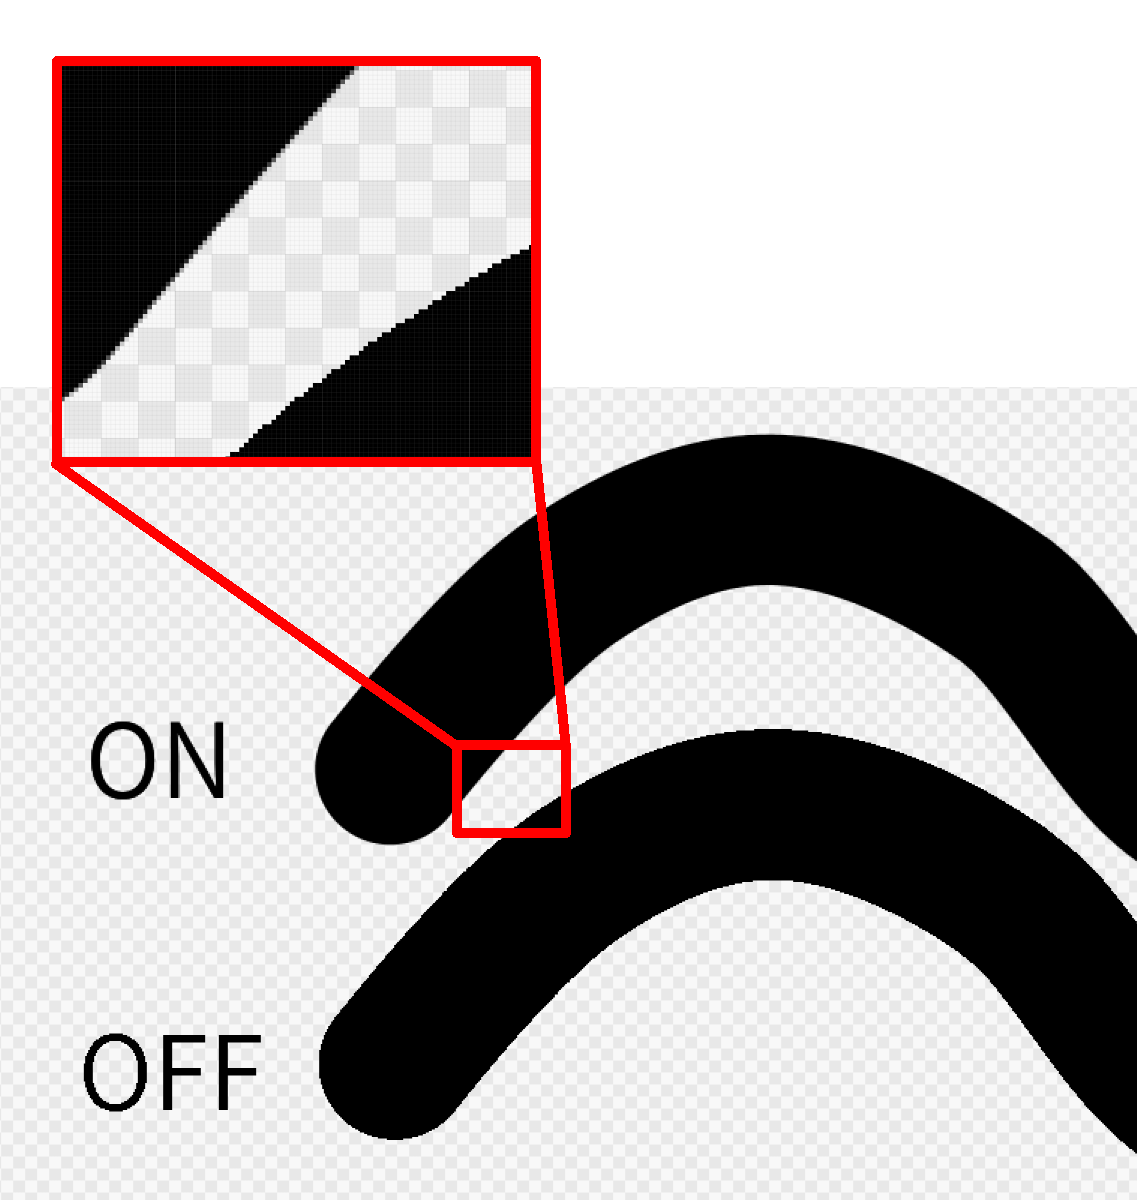 Line difference due to anti-aliasing presence / absence